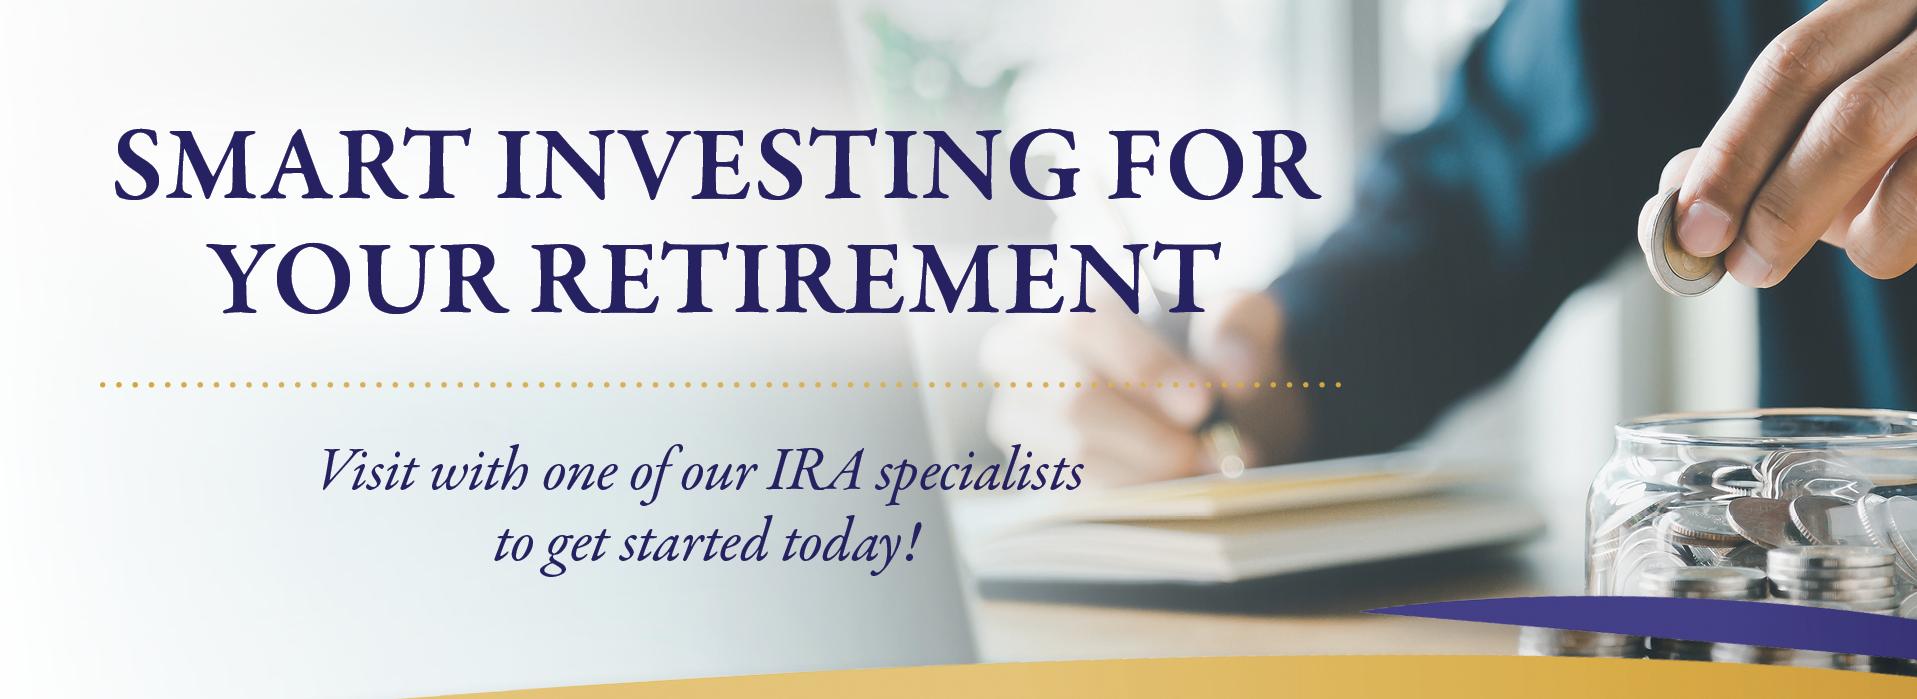 Smart Investing for Your Retirement.  Visit with one of our IRA specialists to get started today! With image of someone writing in a ledger and dropping change in a jar.